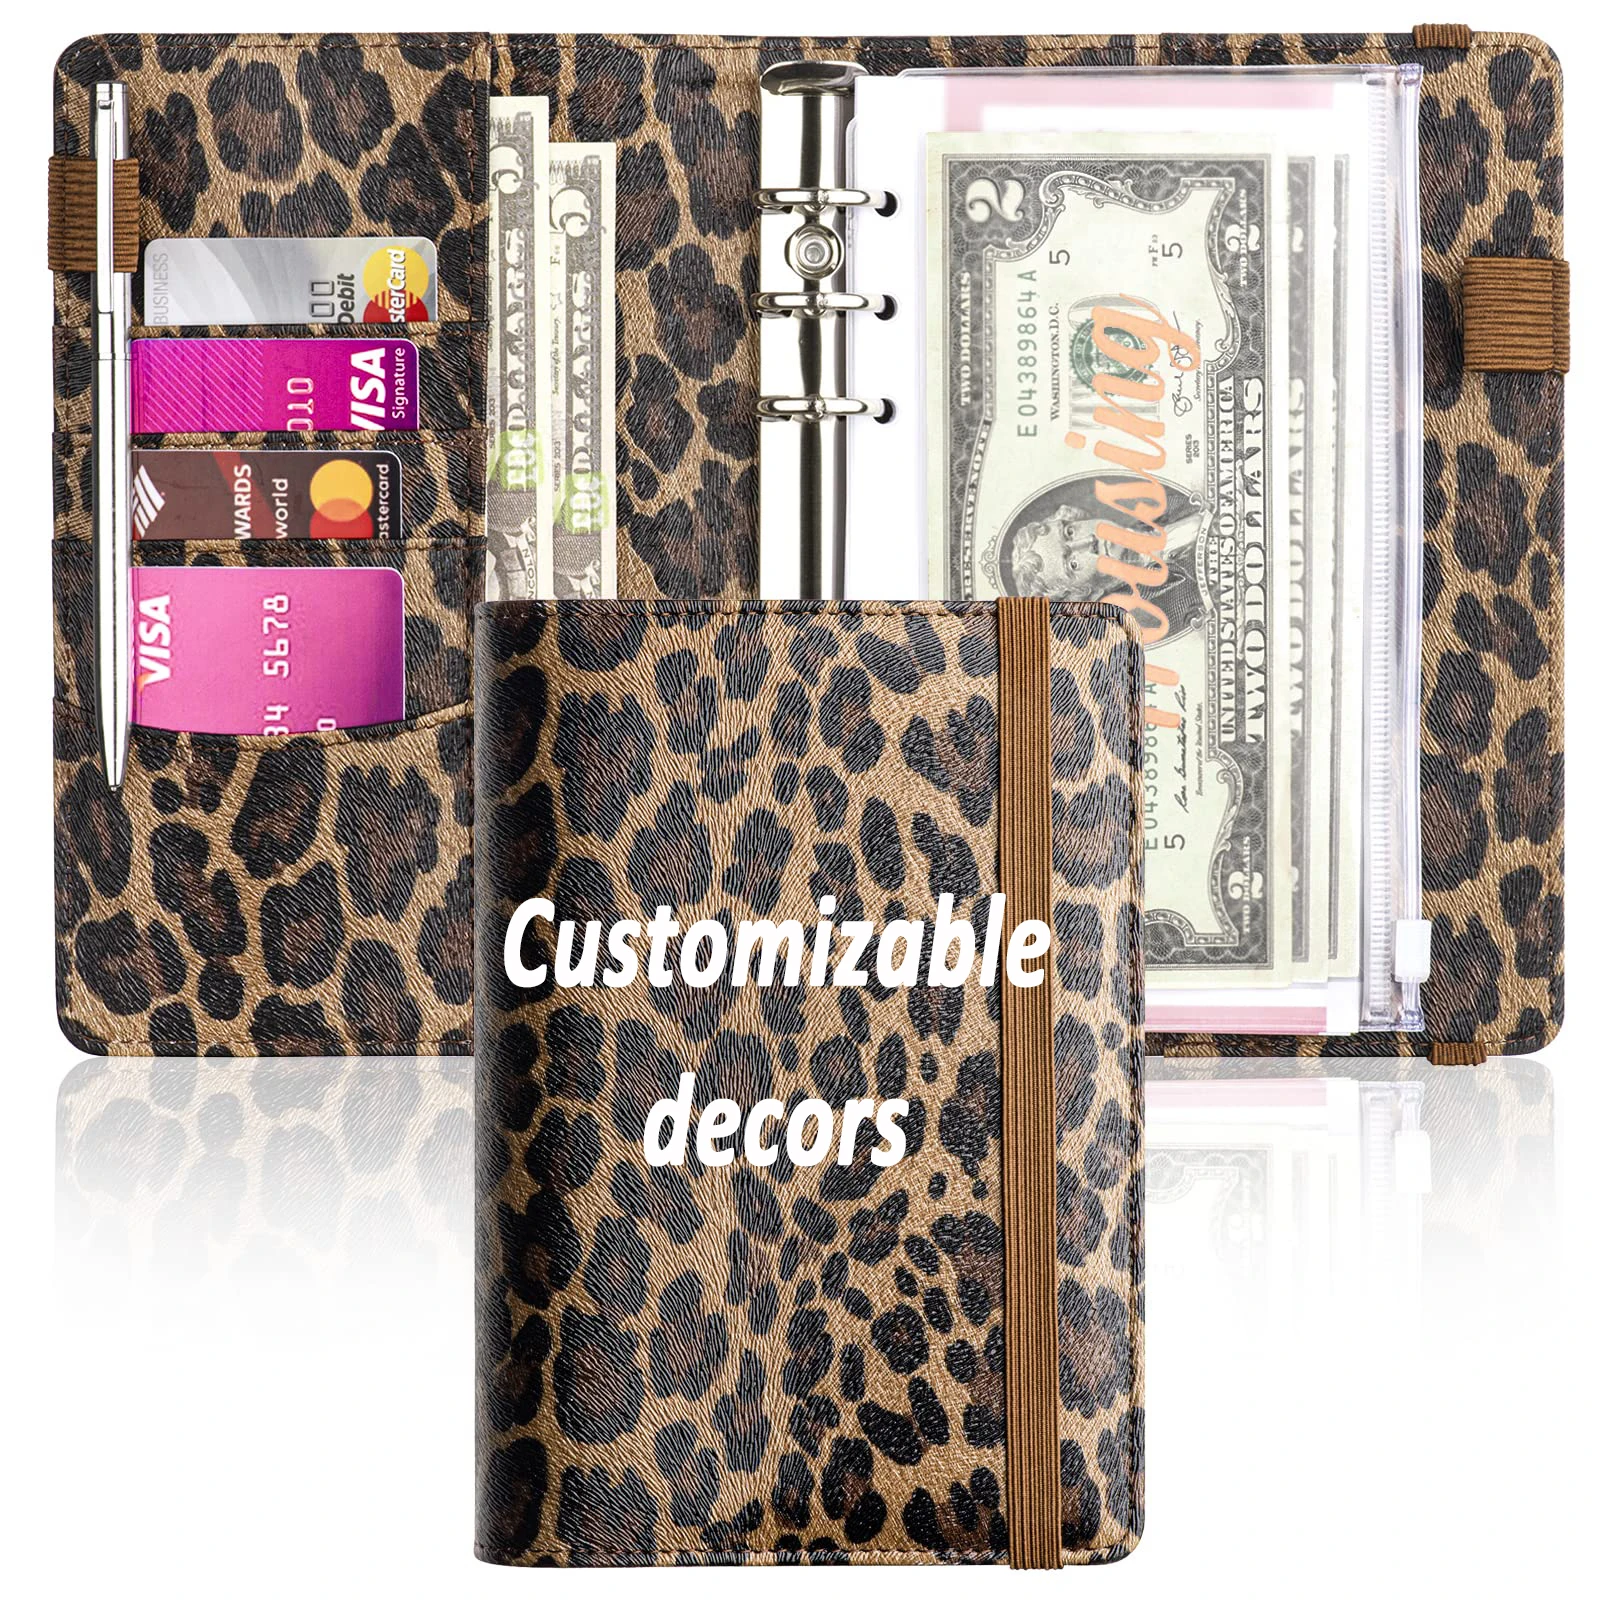 

Leopard PU Leather Budget Planner Money Organizer binder notebook with Cash Envelopes Sheets Rose Gold Category Stickers